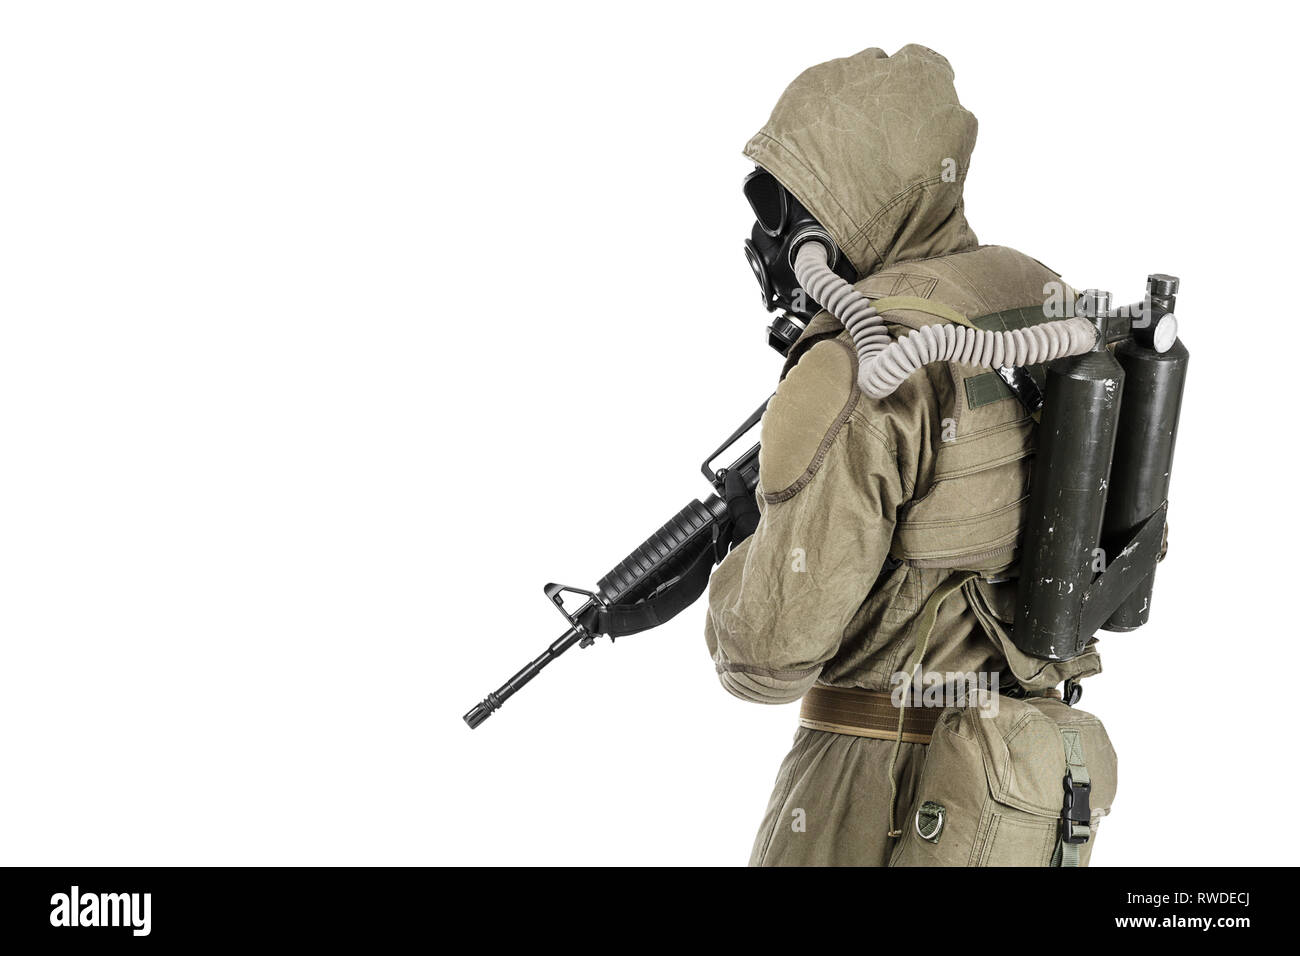 Soldier in a Nuclear Apocalypse Stock Image - Image of nightmare